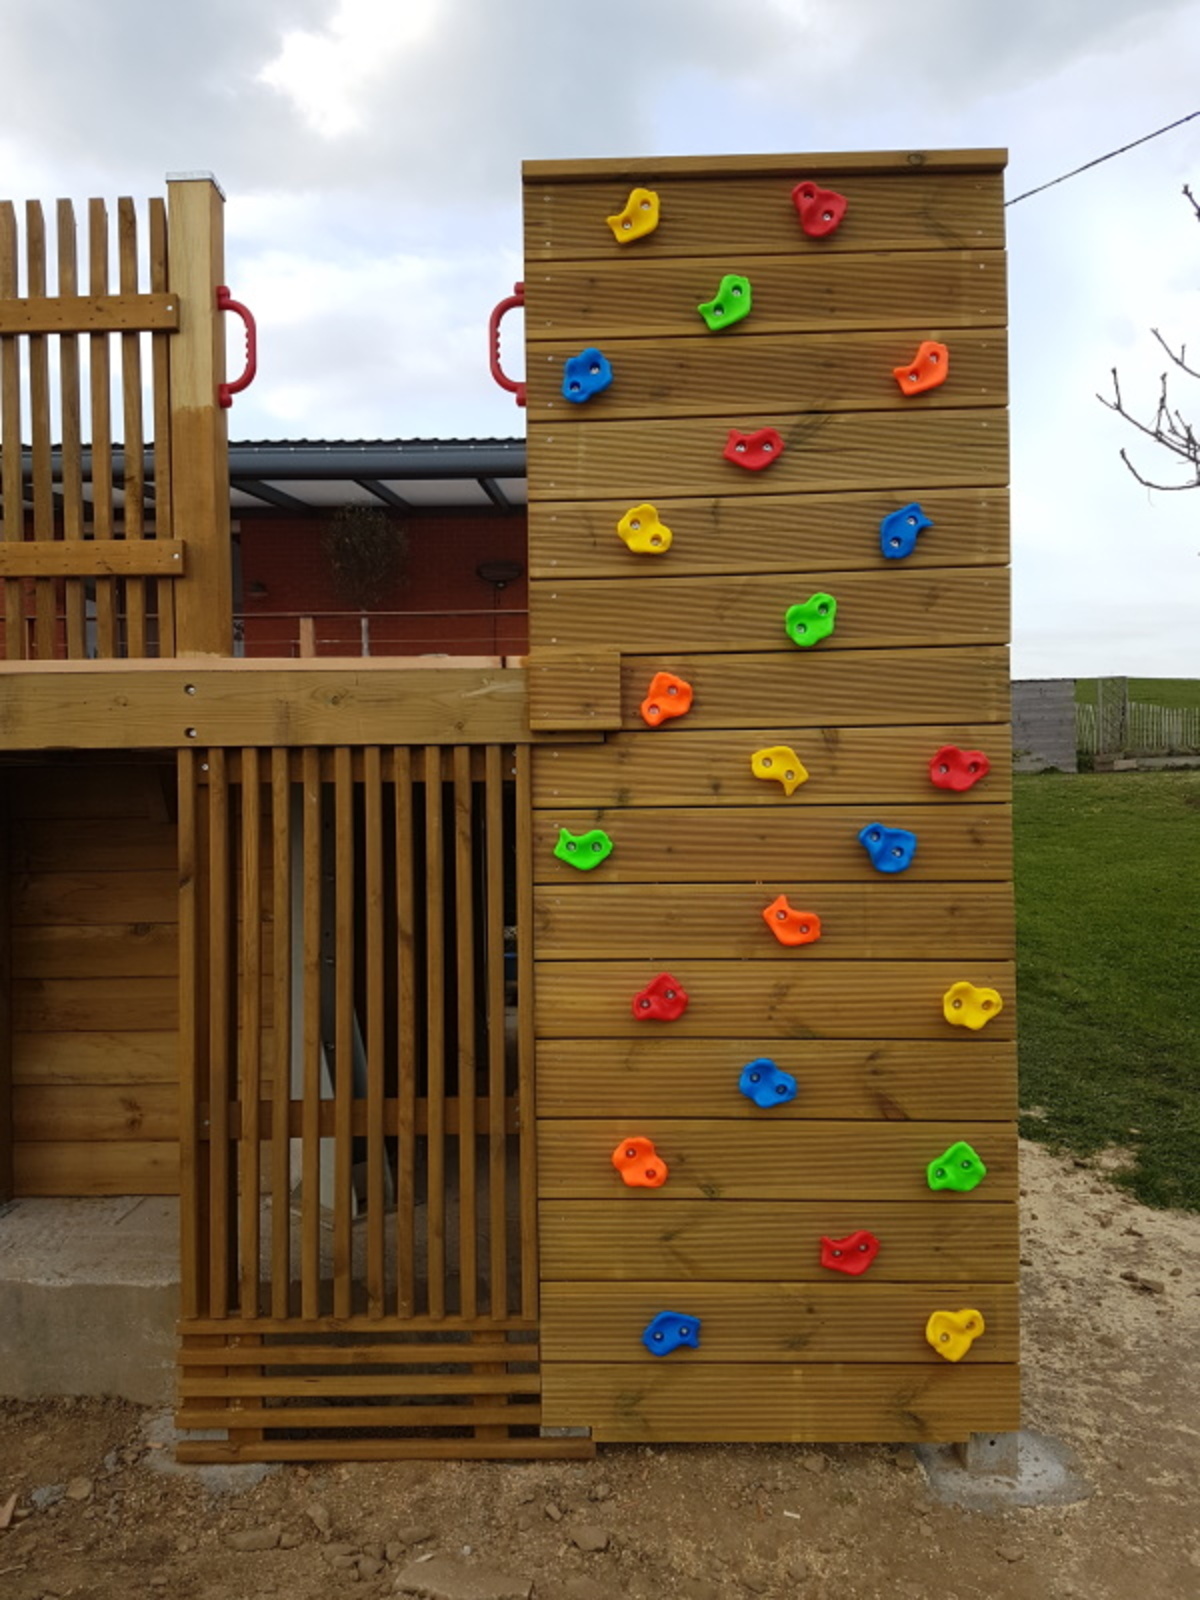 Play tower for kids